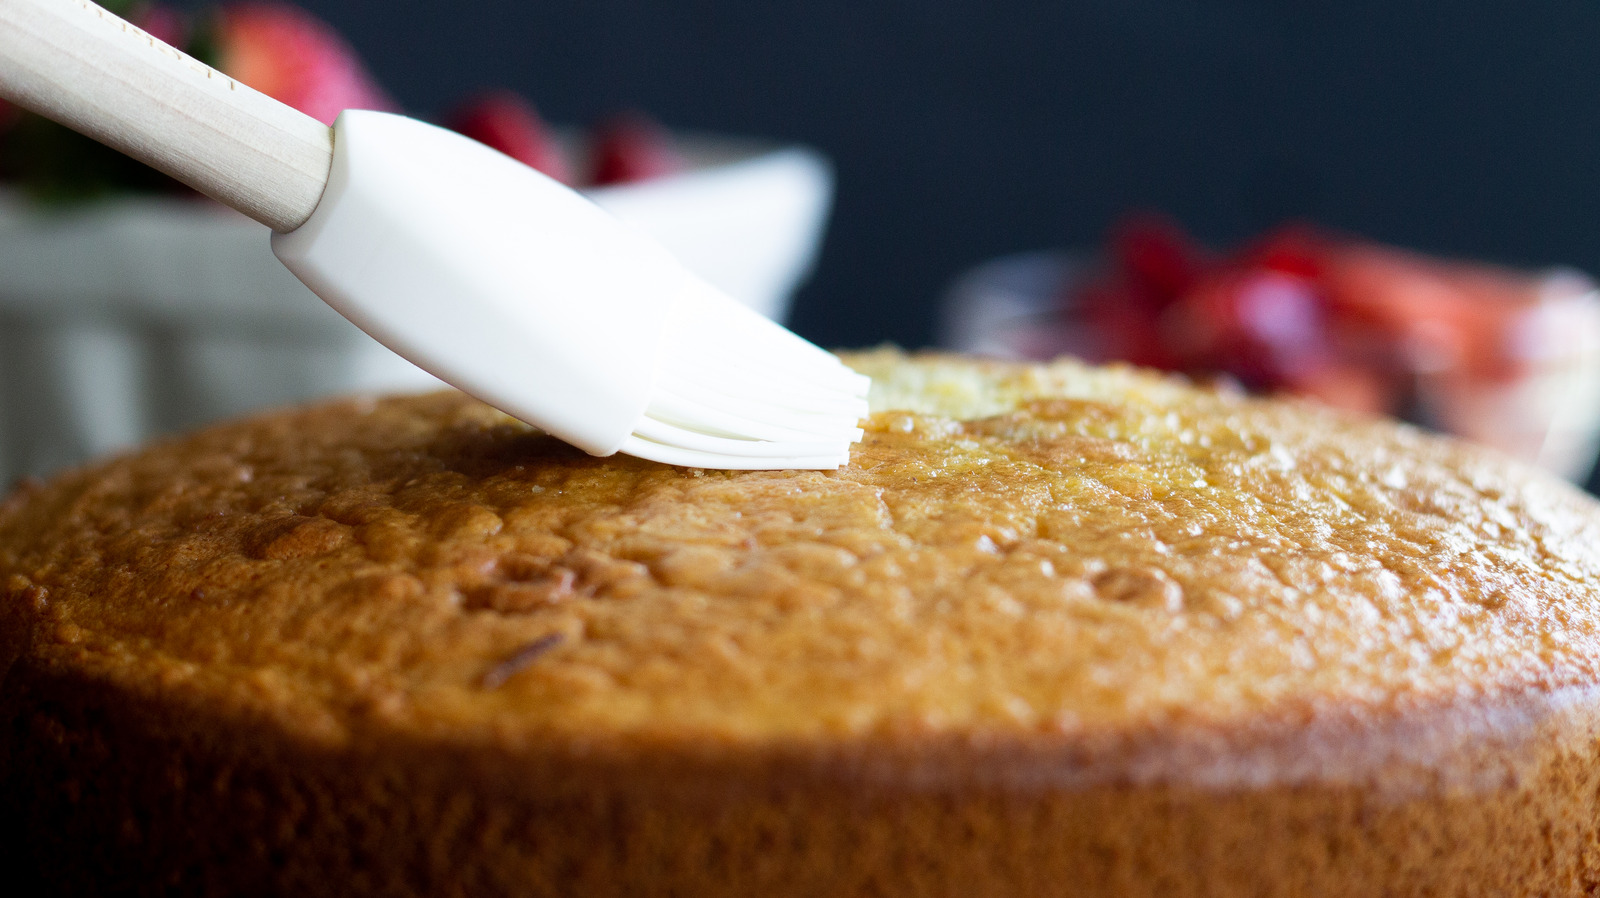 Why You Should Brush Your Cake With Simple Syrup